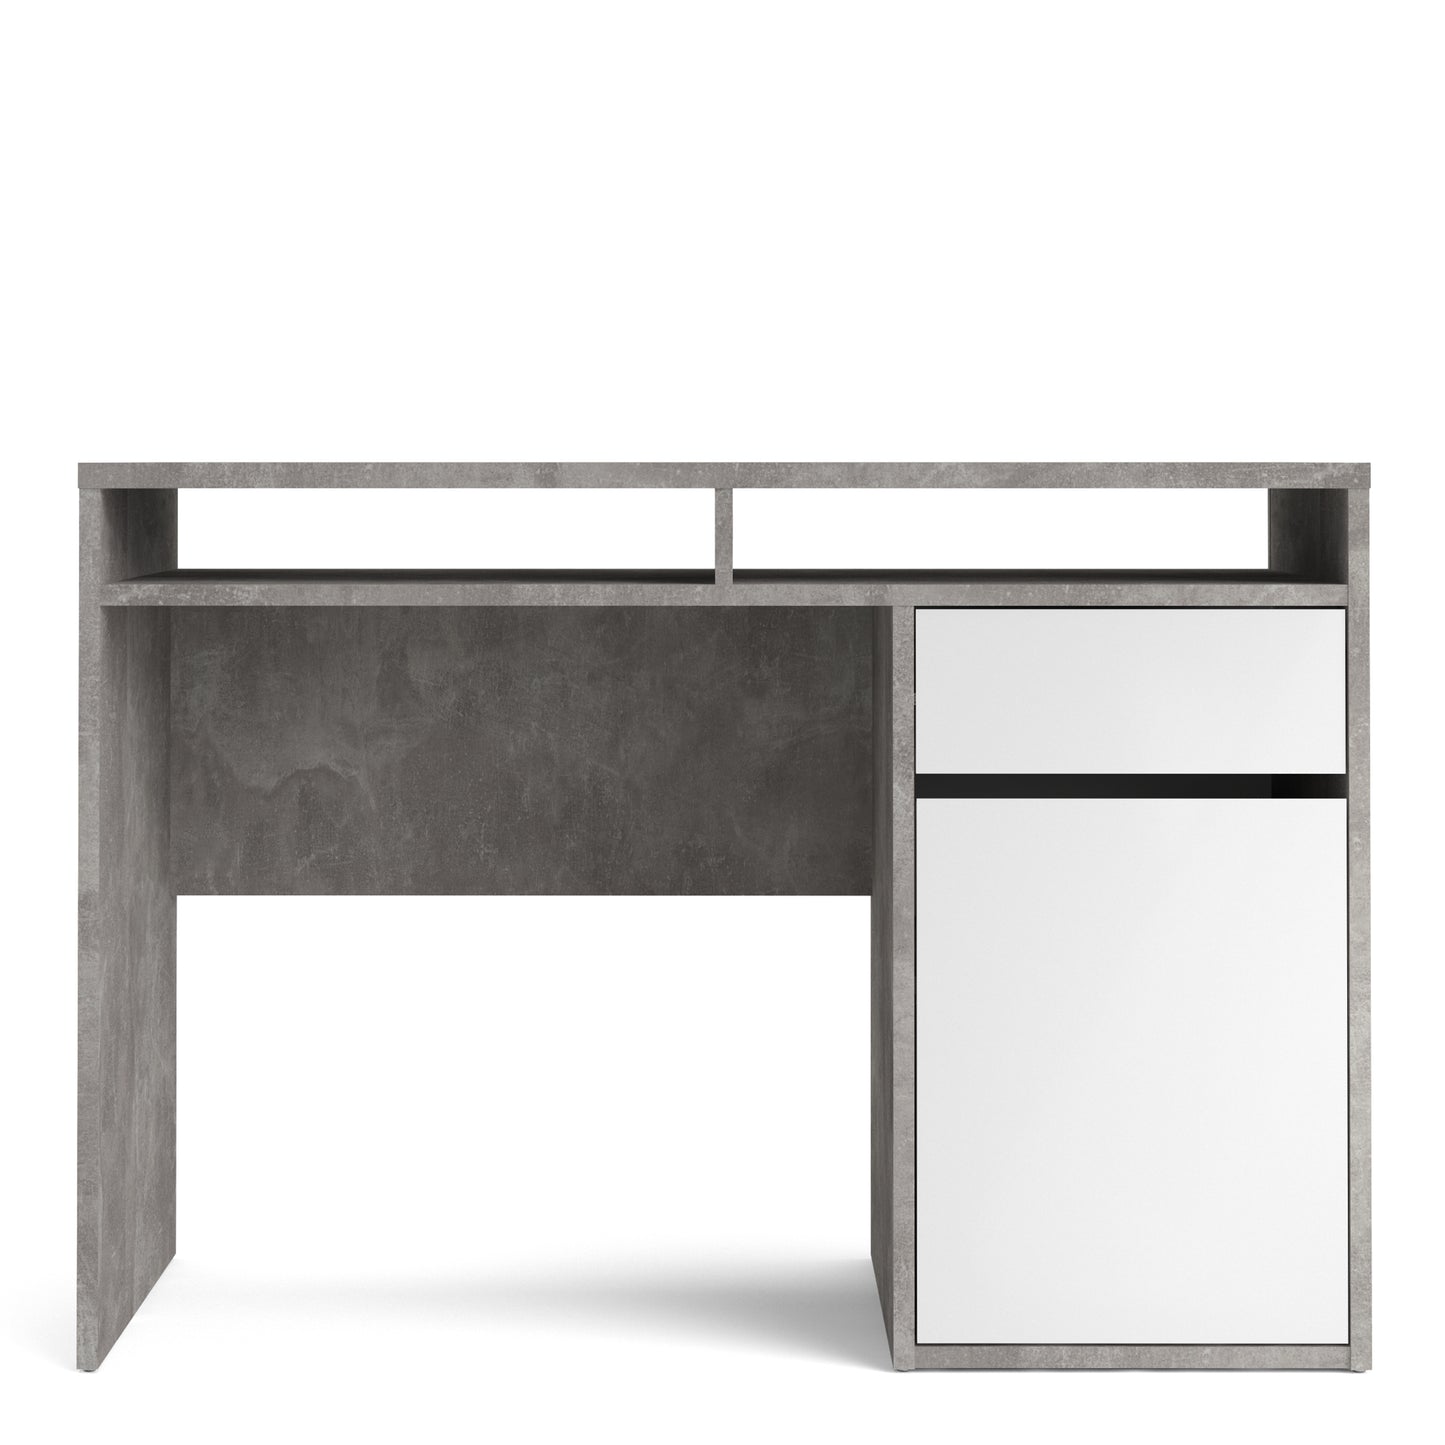 Function Plus  Desk 1 Door 1 Drawer in White and Grey